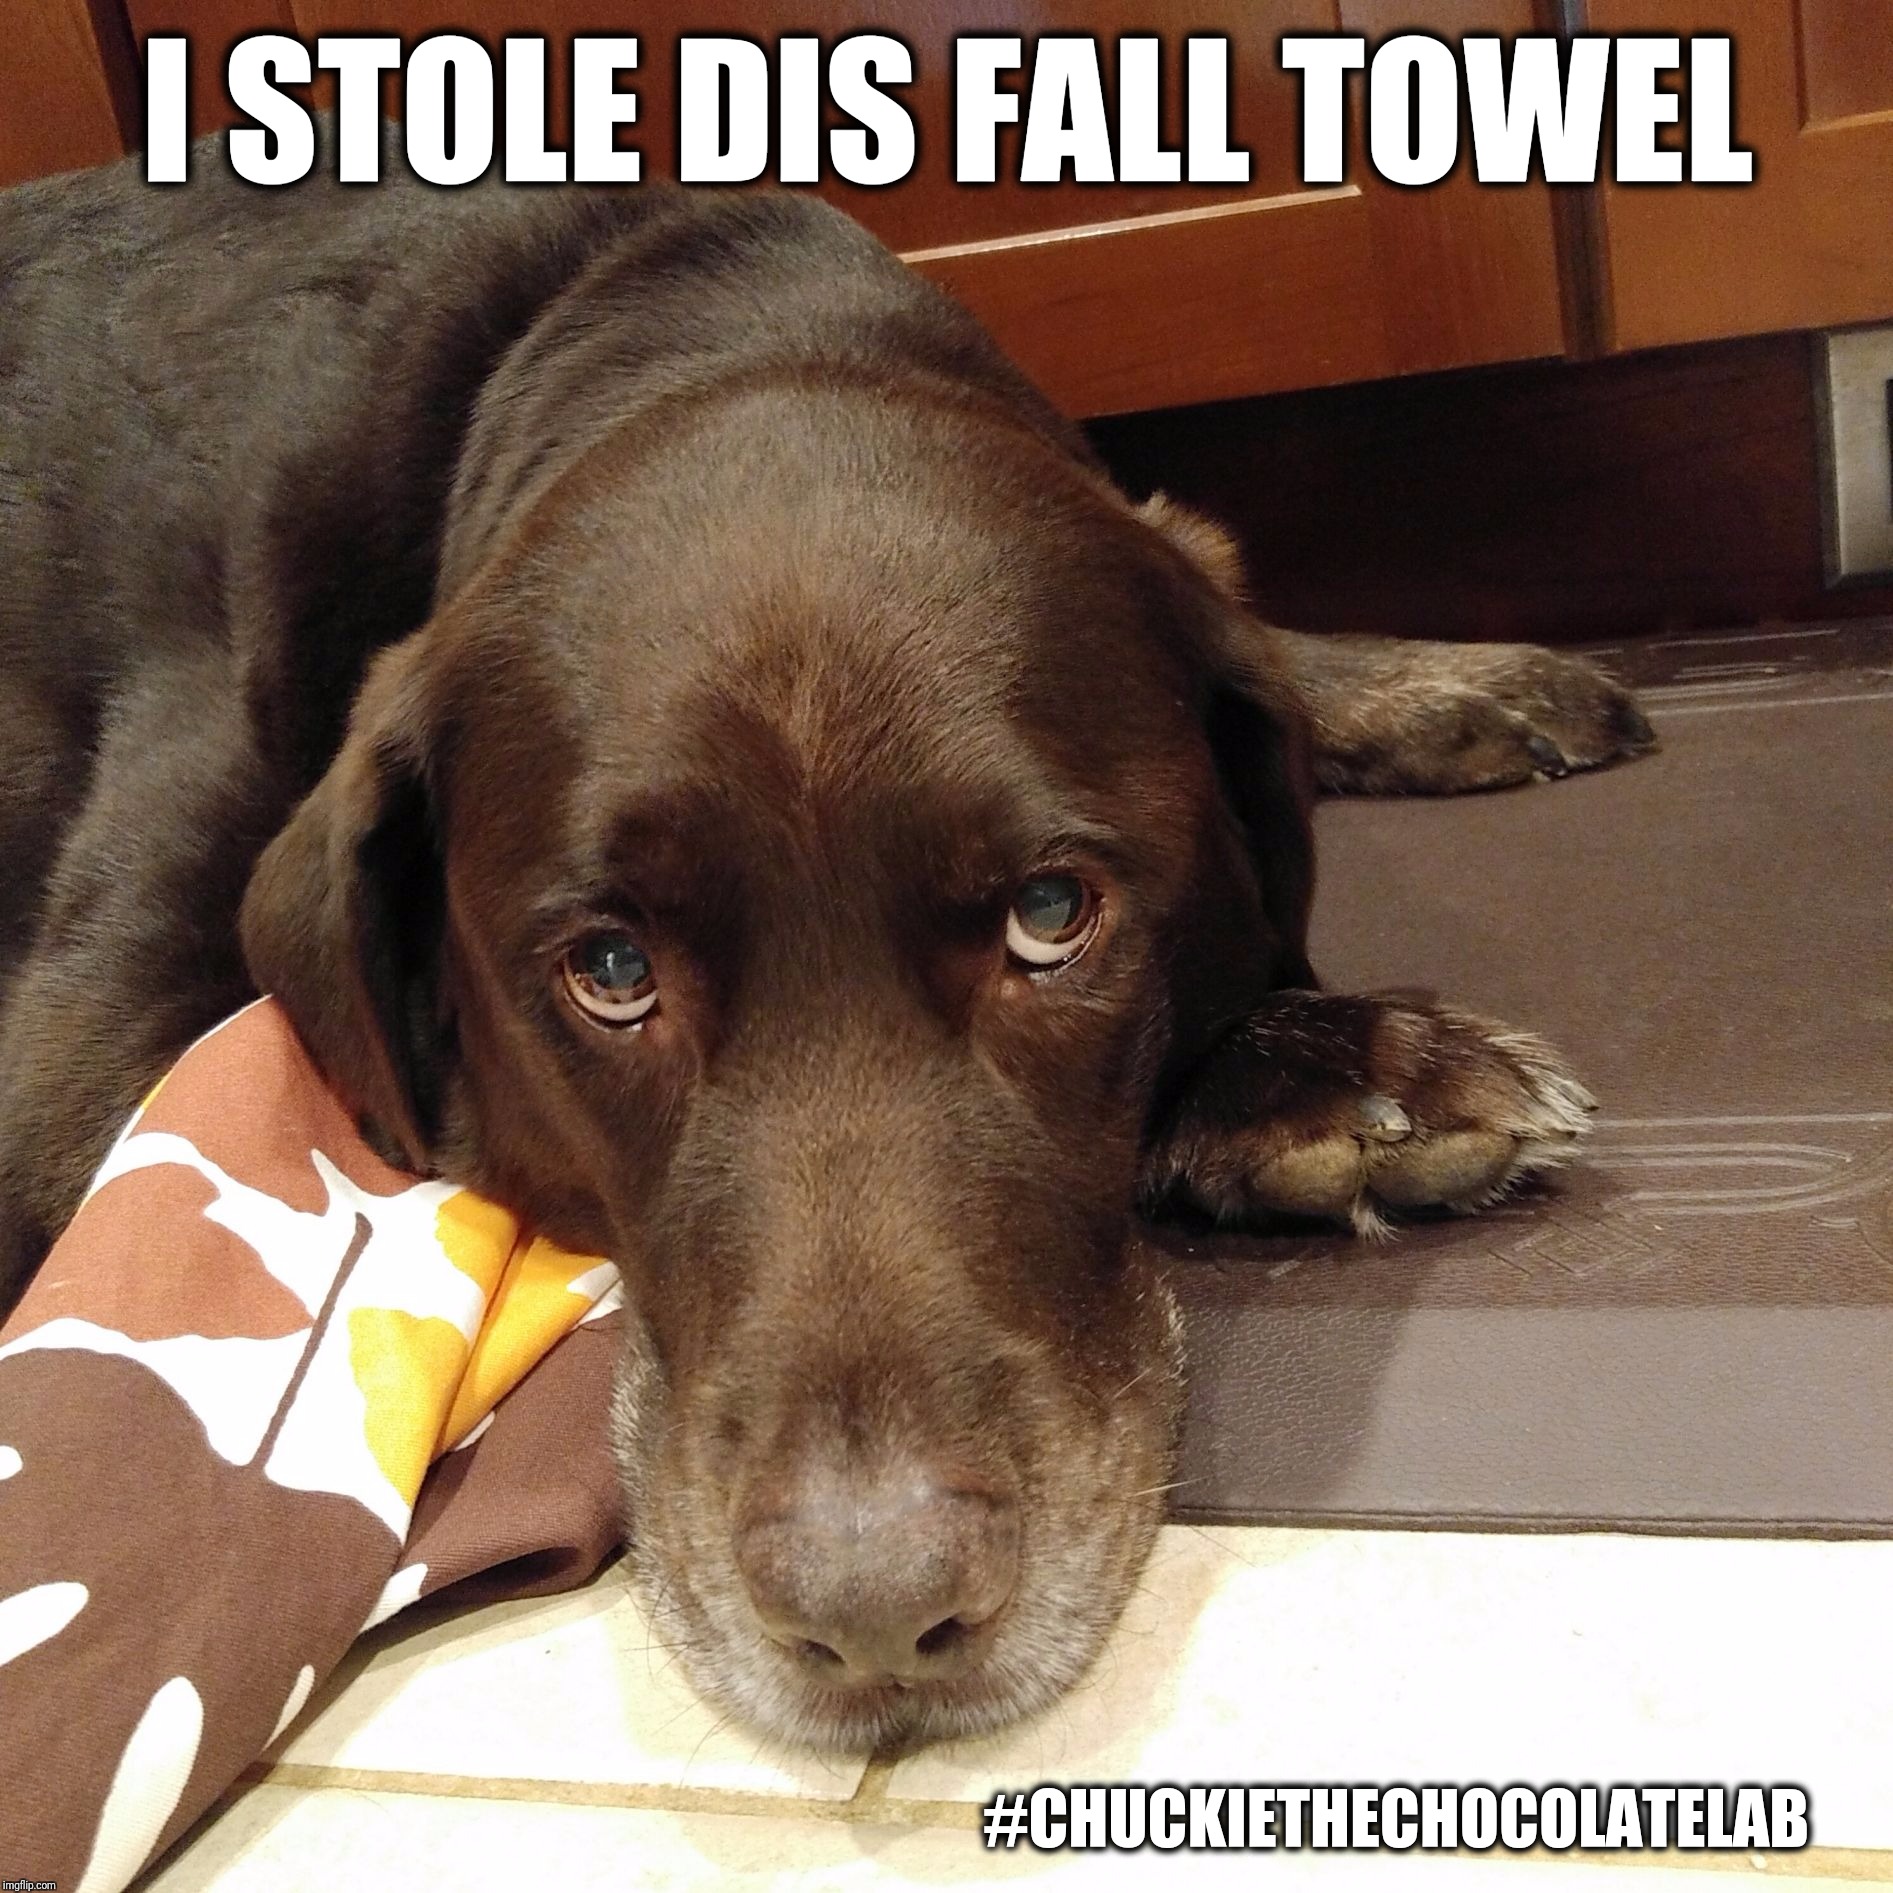 I stole dis fall towel | I STOLE DIS FALL TOWEL; #CHUCKIETHECHOCOLATELAB | image tagged in chuckie the chocolate lab teamchuckie,fall,i stole dis,dogs,funny,memes | made w/ Imgflip meme maker